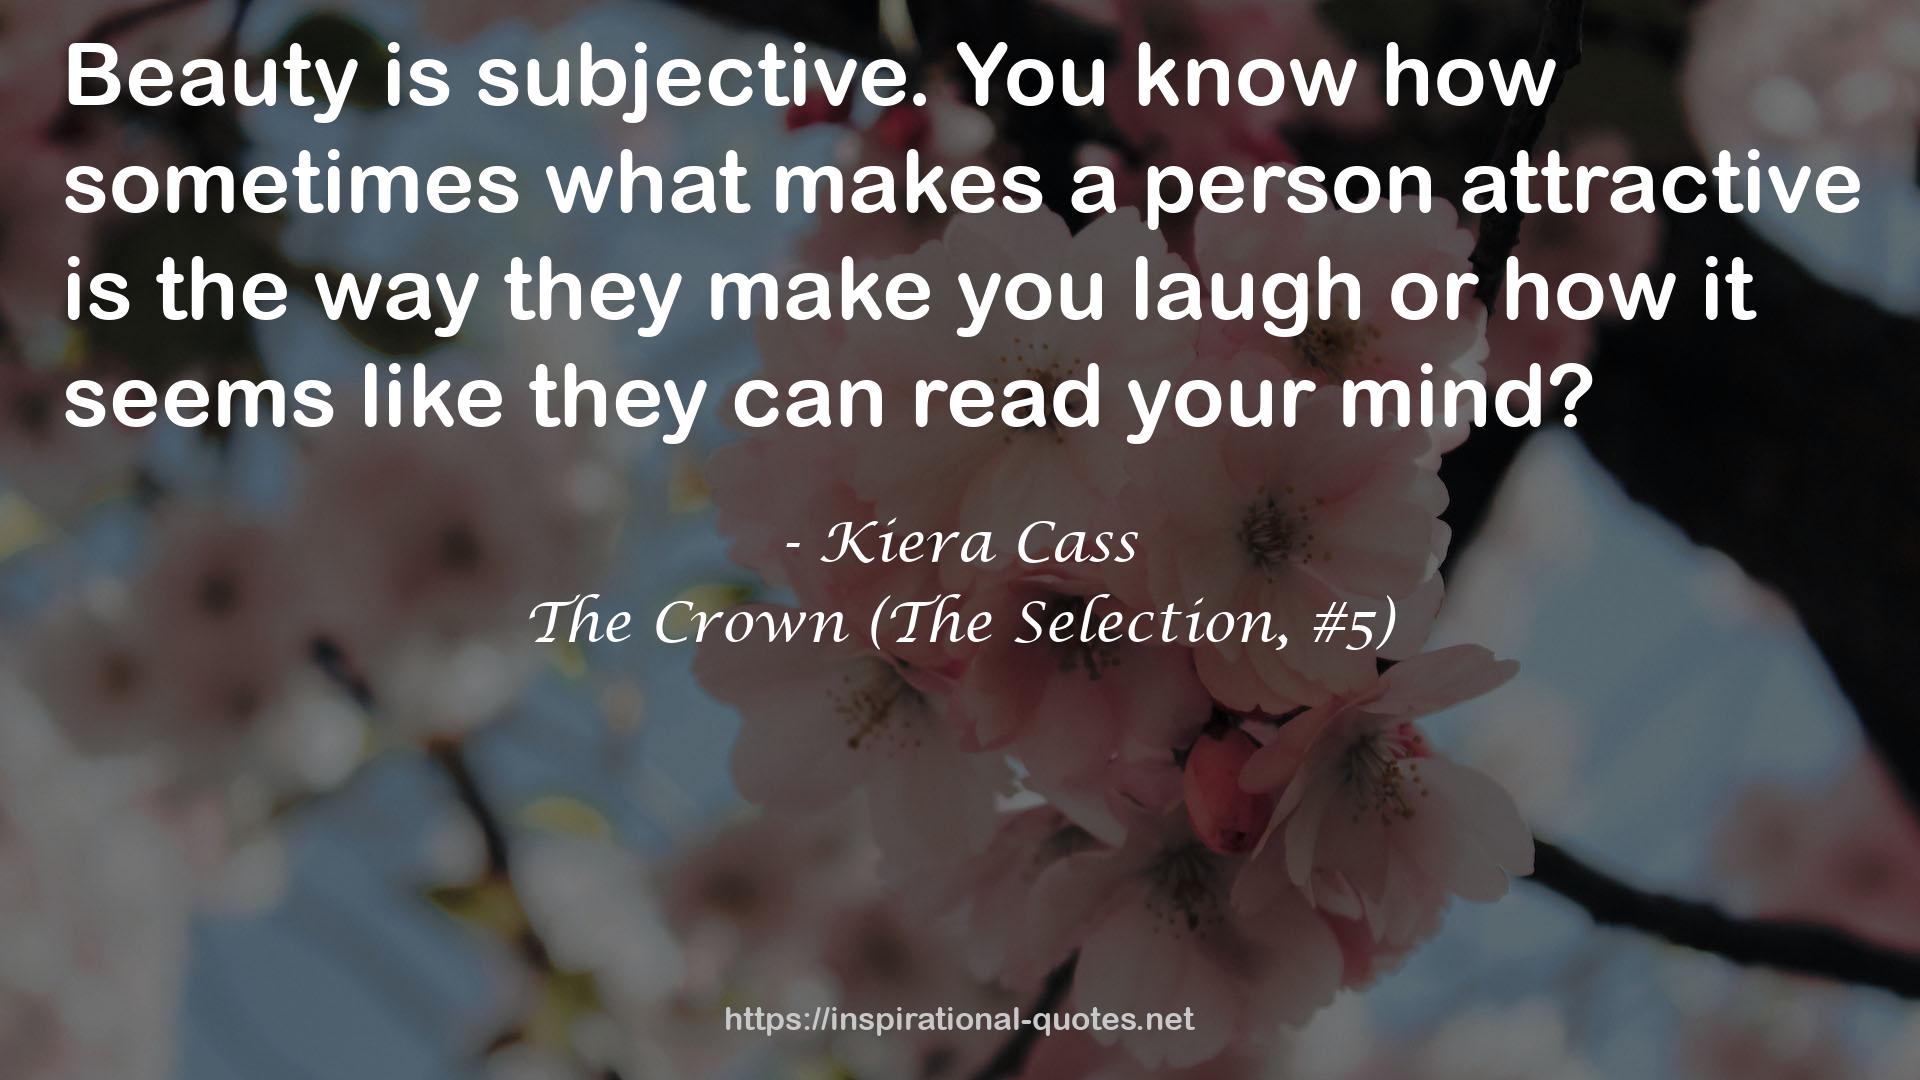 The Crown (The Selection, #5) QUOTES